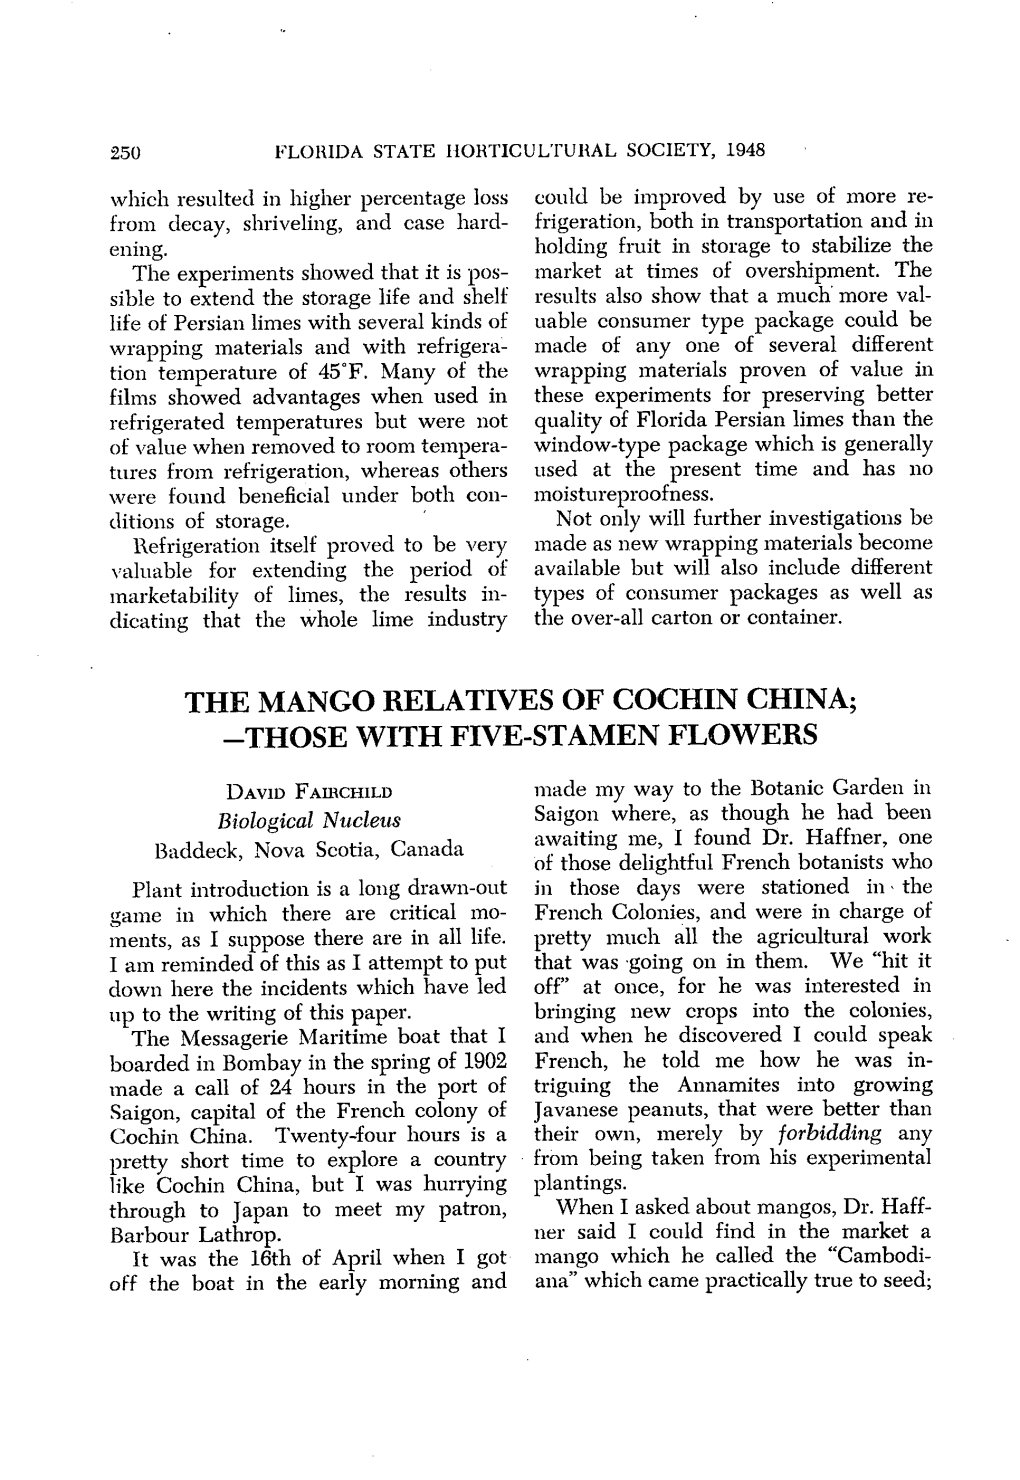 The Mango Relatives of Cochin China; -Those with Five-Stamen Flowers